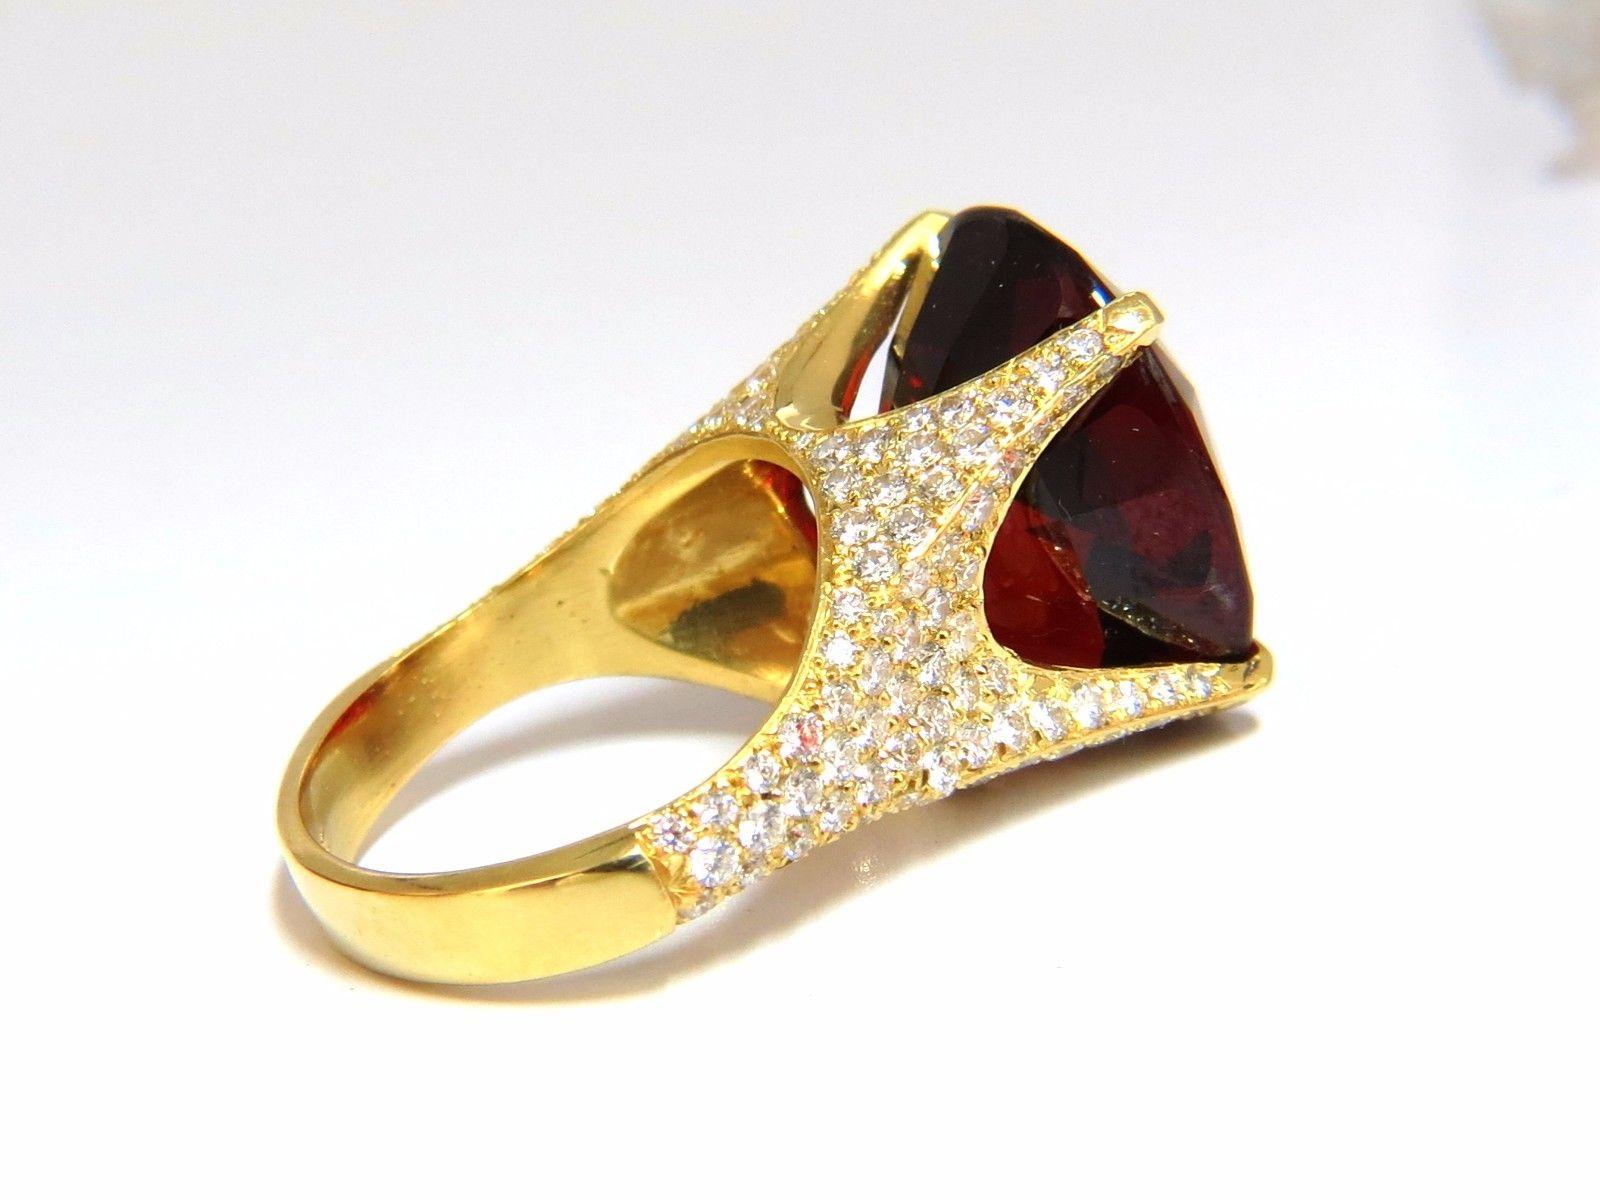 Round Cut 26.31ct GIA Natural Red Spessartite Garnet Diamonds Raised Crown Ring 18KT For Sale